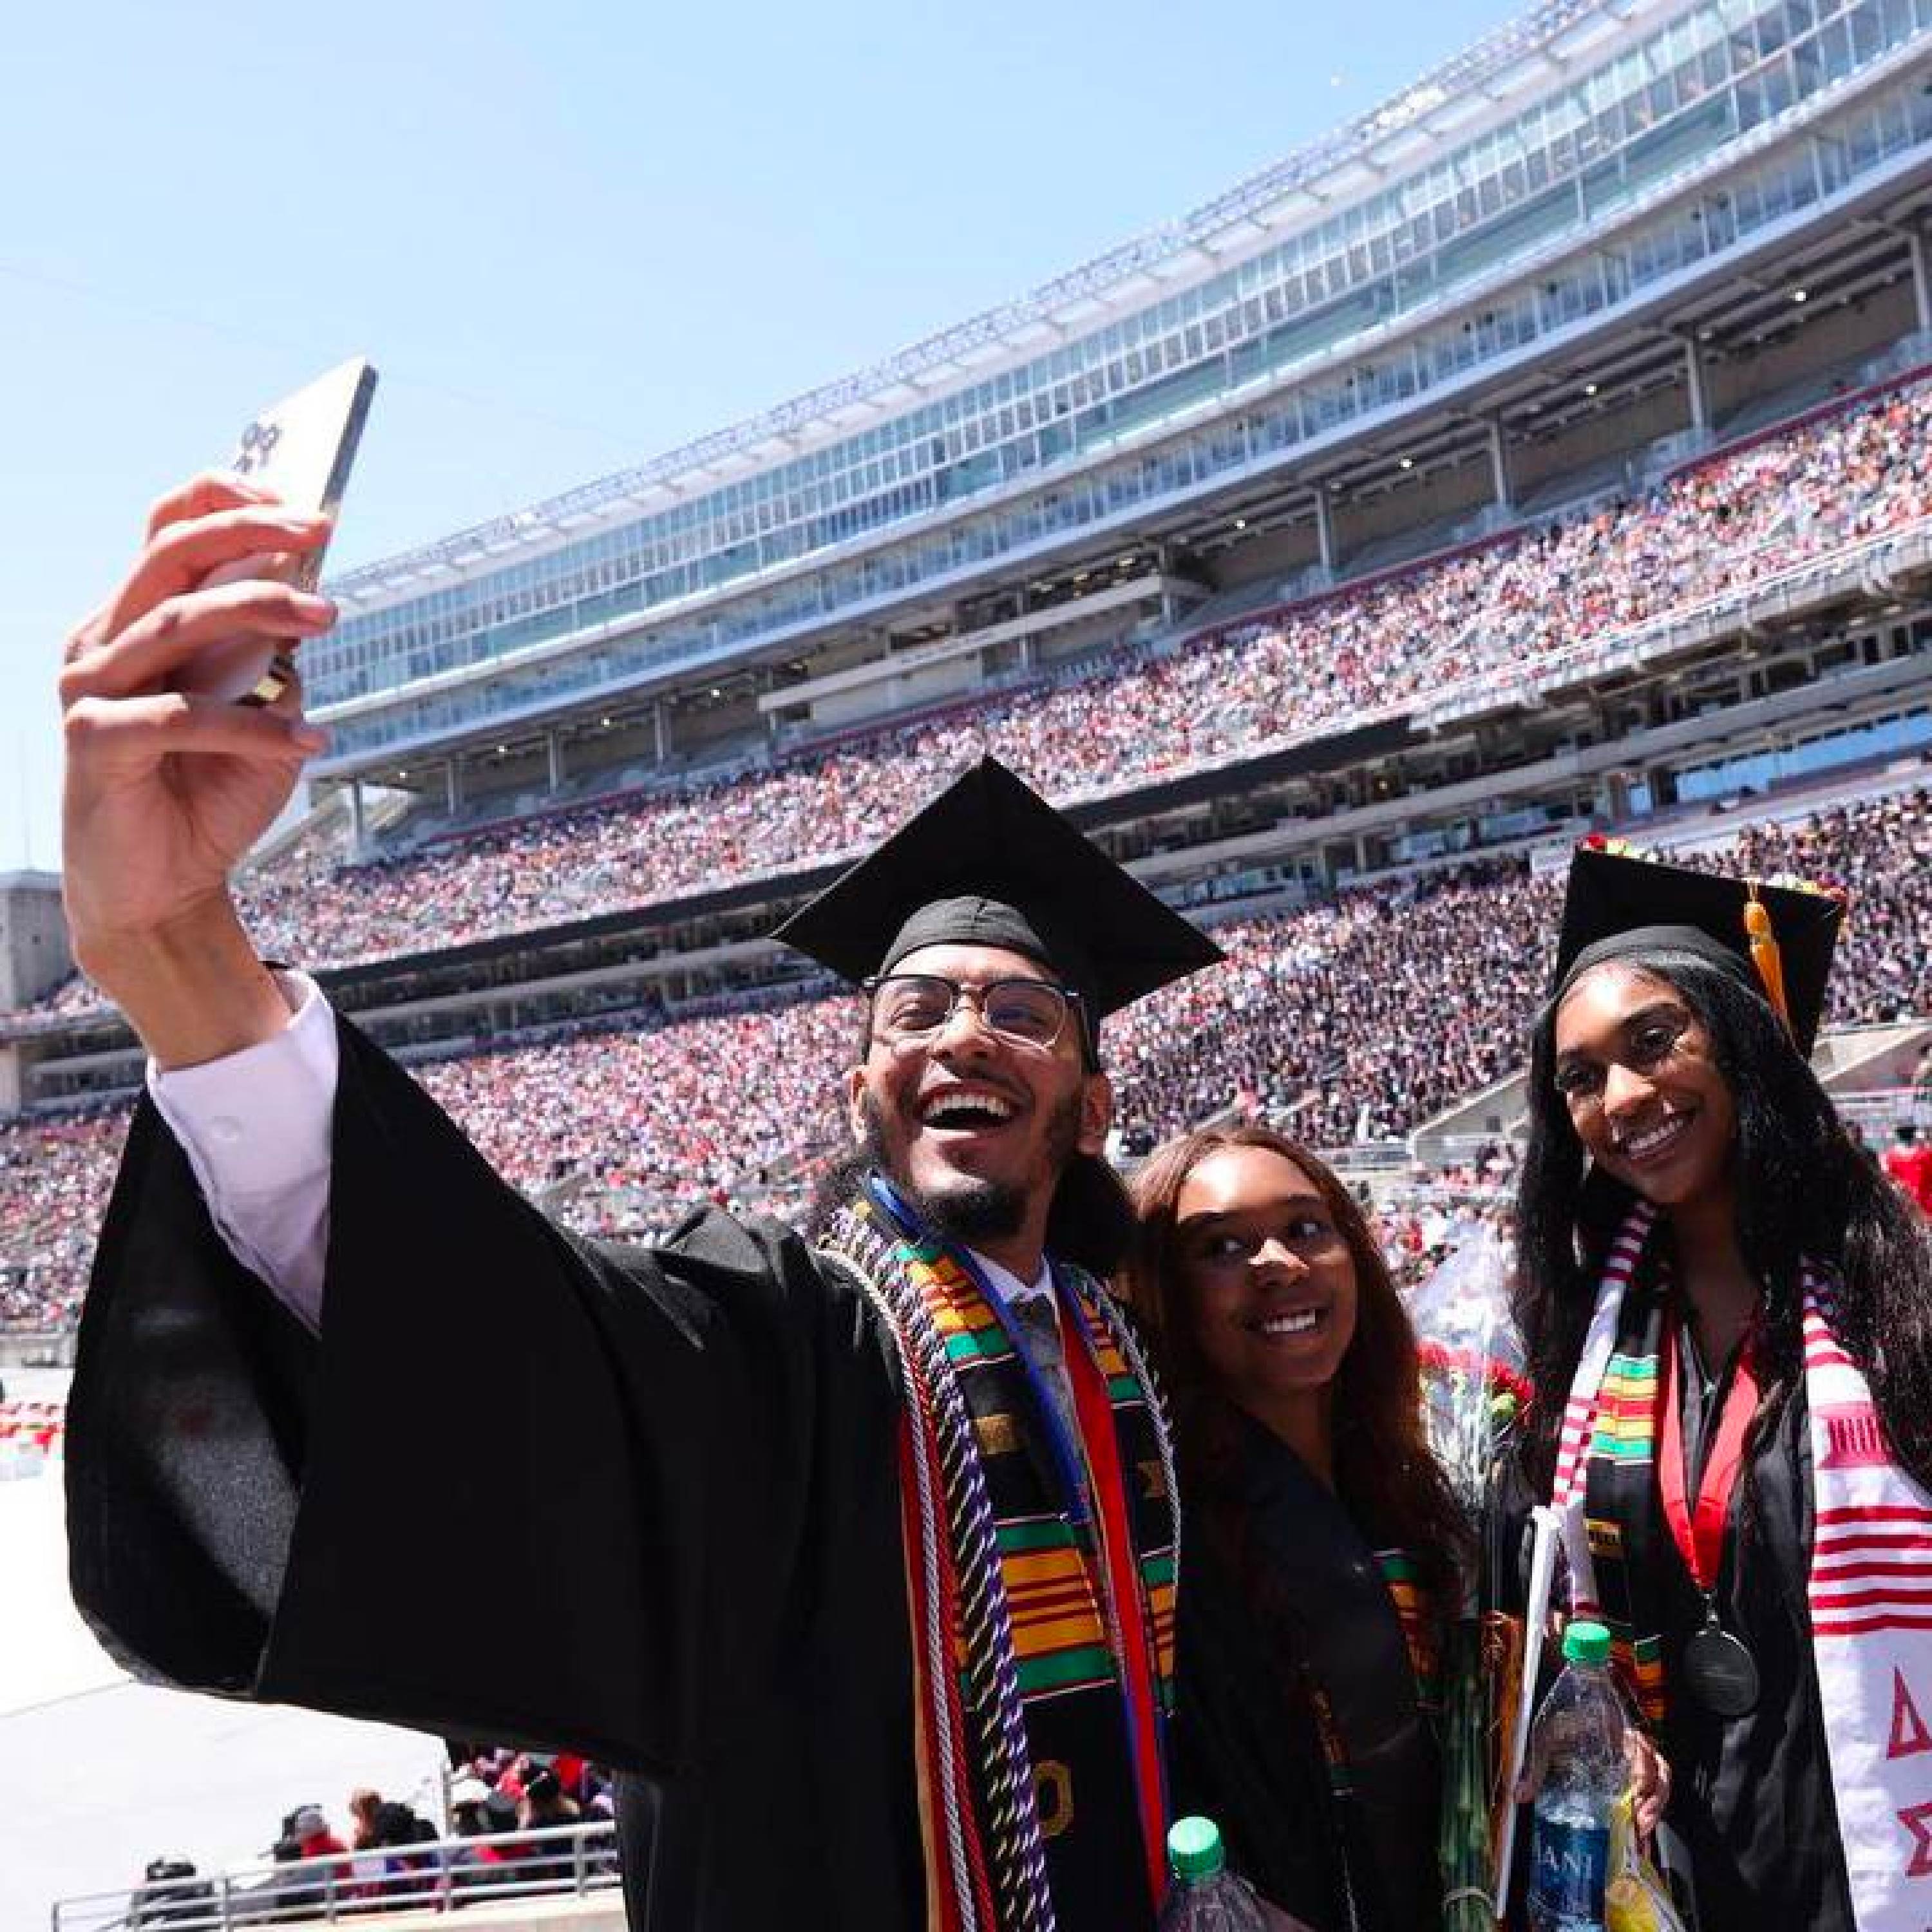 A student graduating from Ohio State in Ohio Stadium smiles while taking a selfie of himself and two friends.